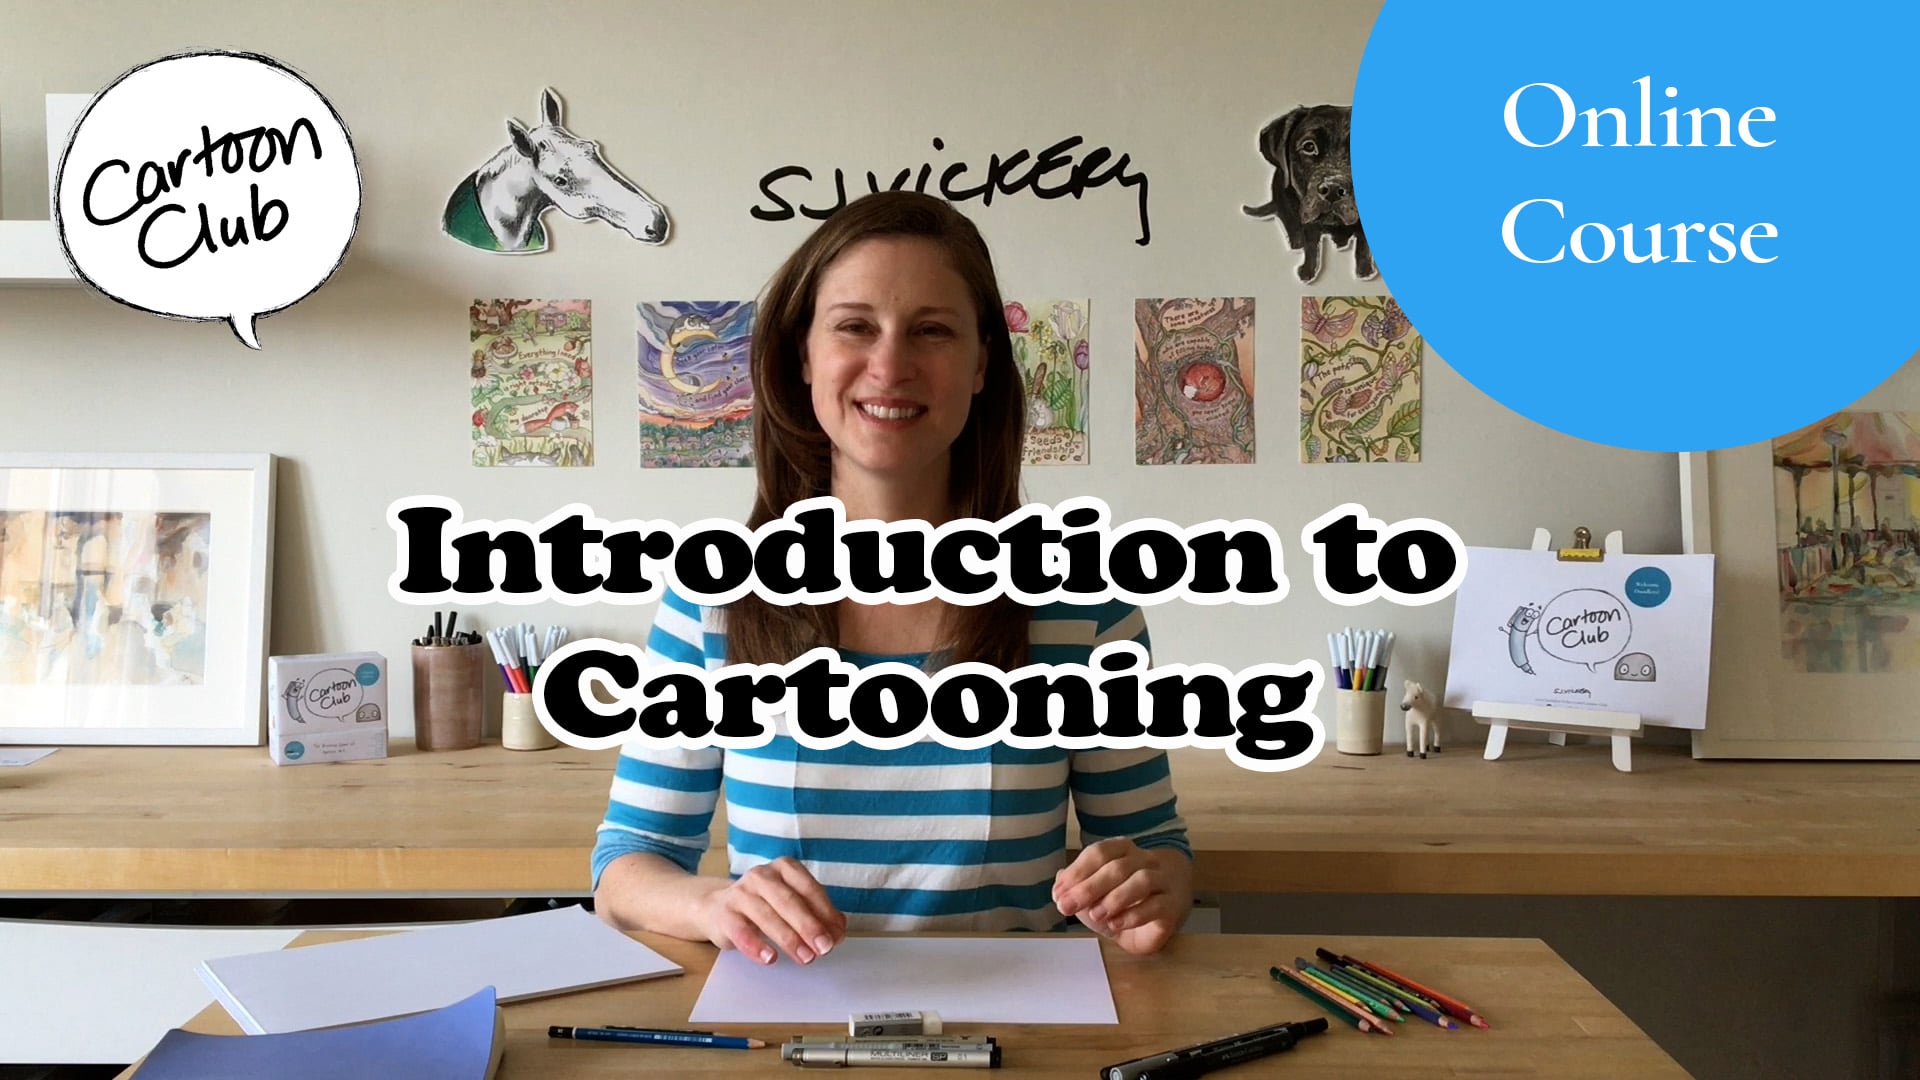 Kids Comic and Cartooning Drawing (Ages 8-12) [Class in NYC] @ The Art  Studio NY